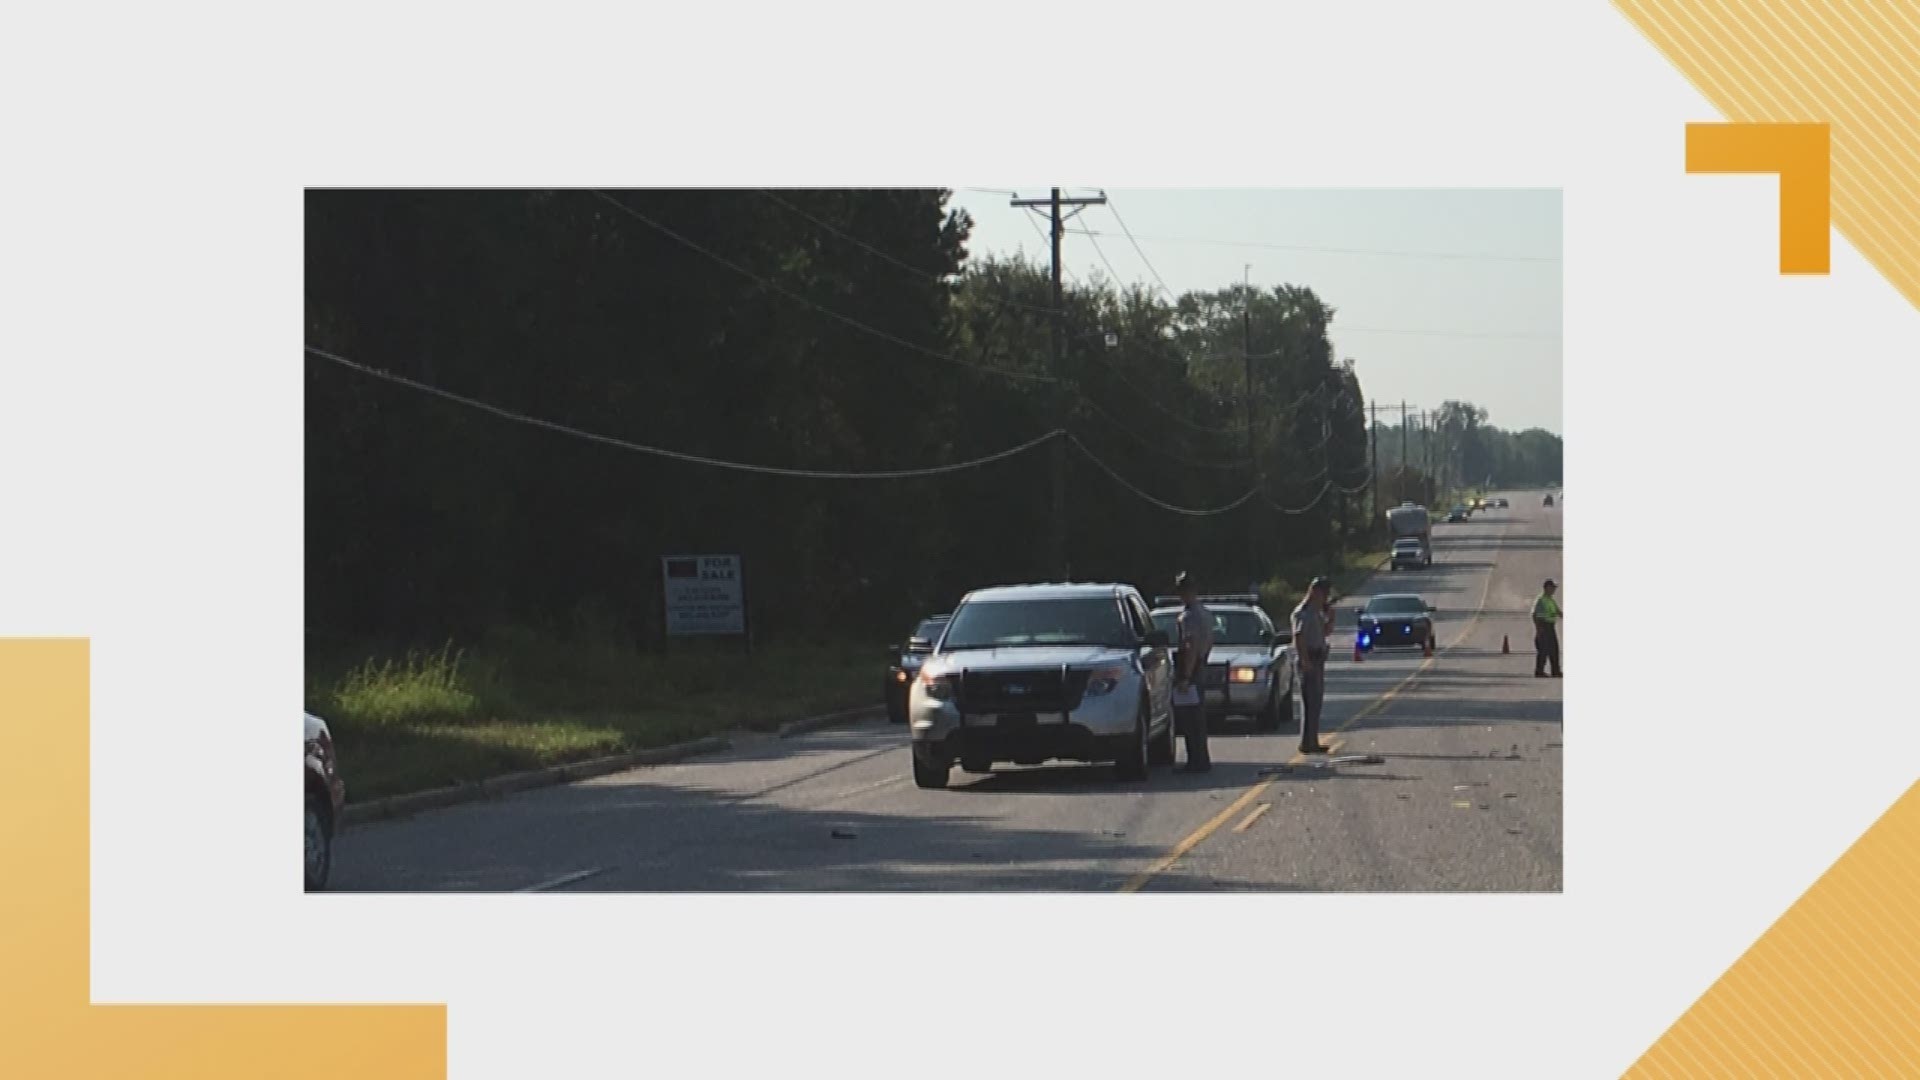 A person died after being struck by a car on Highway 321 in Lexington County.